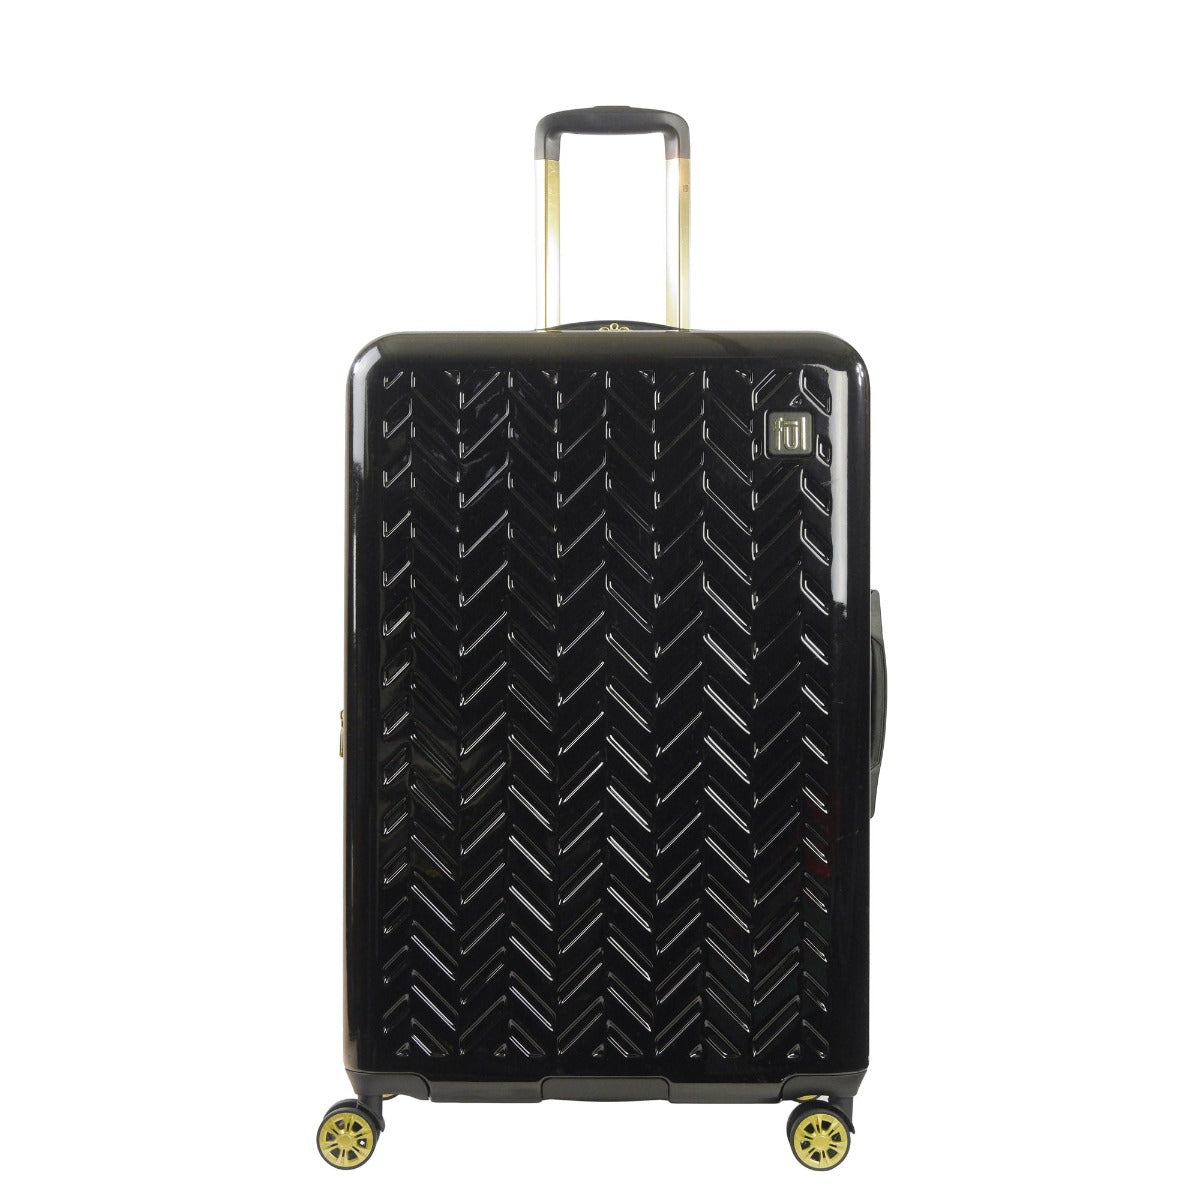 Ful Groove 31 inch hardside spinner suitcase checked black luggage gold details